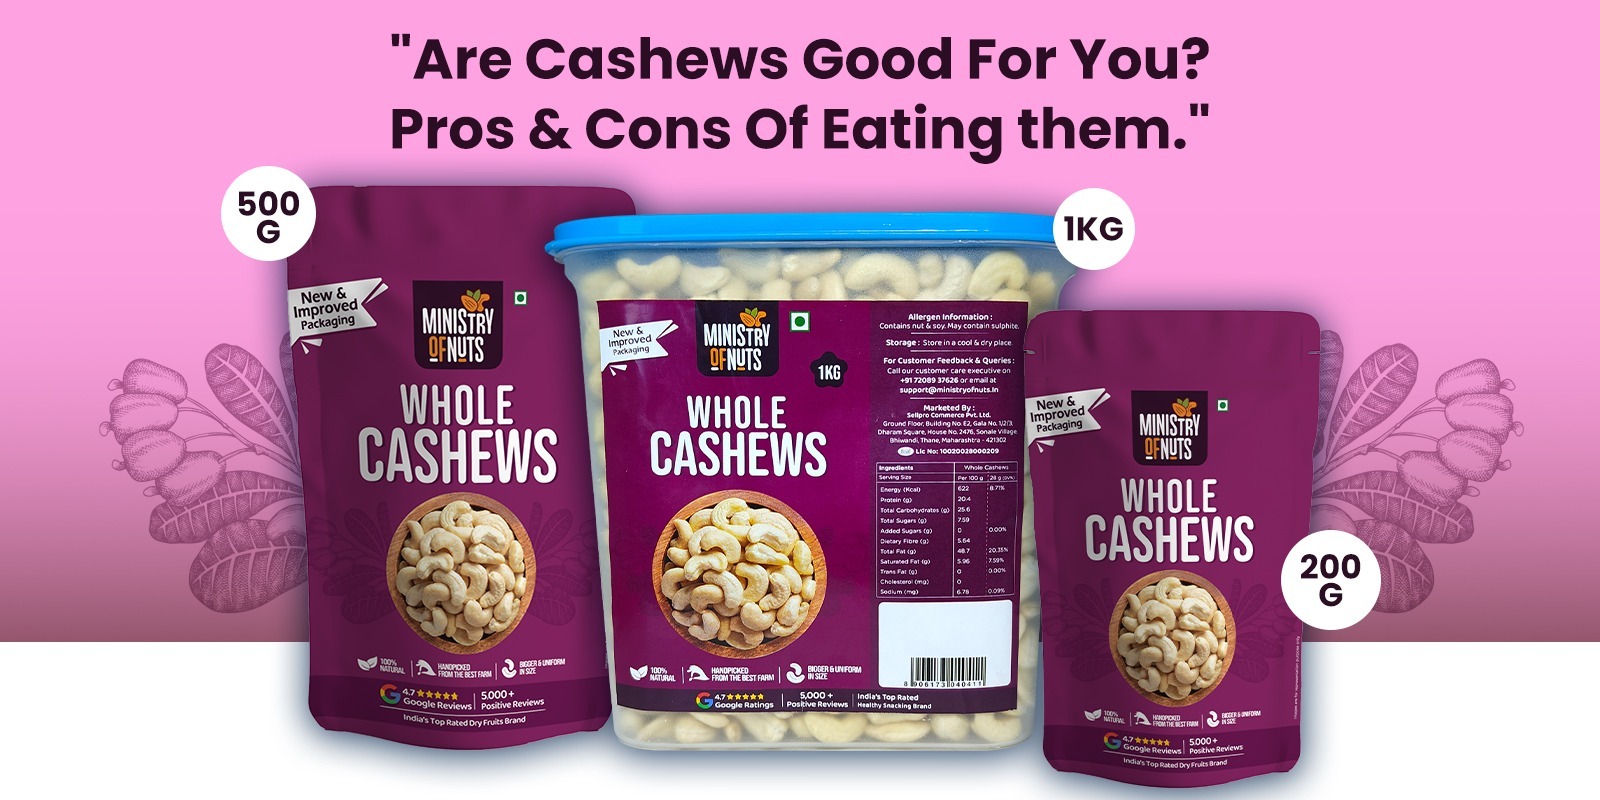 Cashews are the Healthy